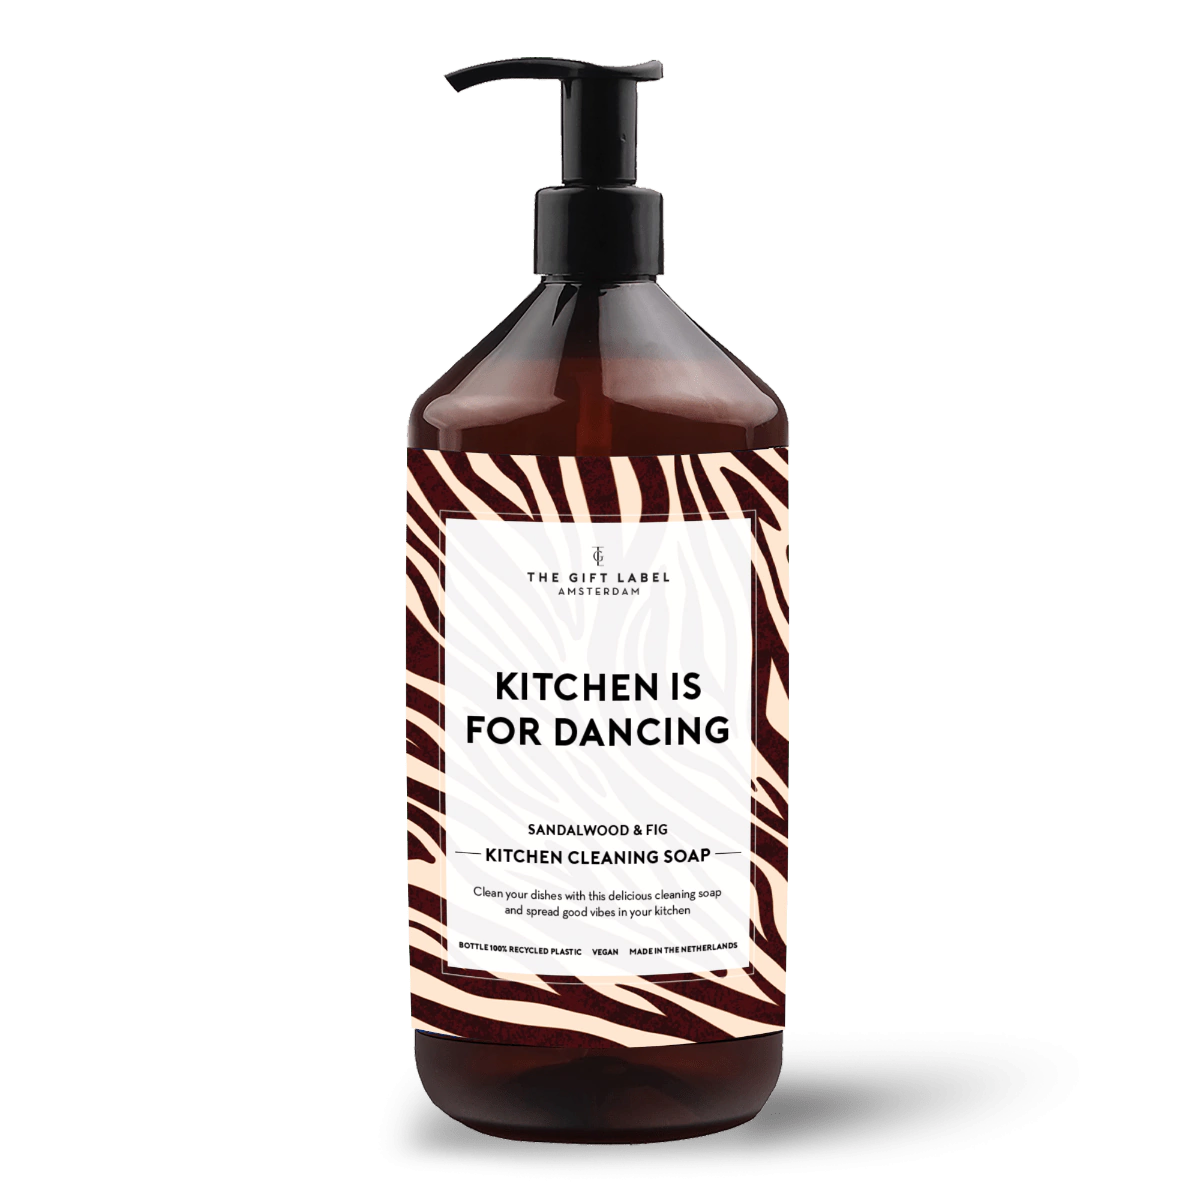 KITCHEN CLEANING SOAP - KITCHEN IS FOR DANCING